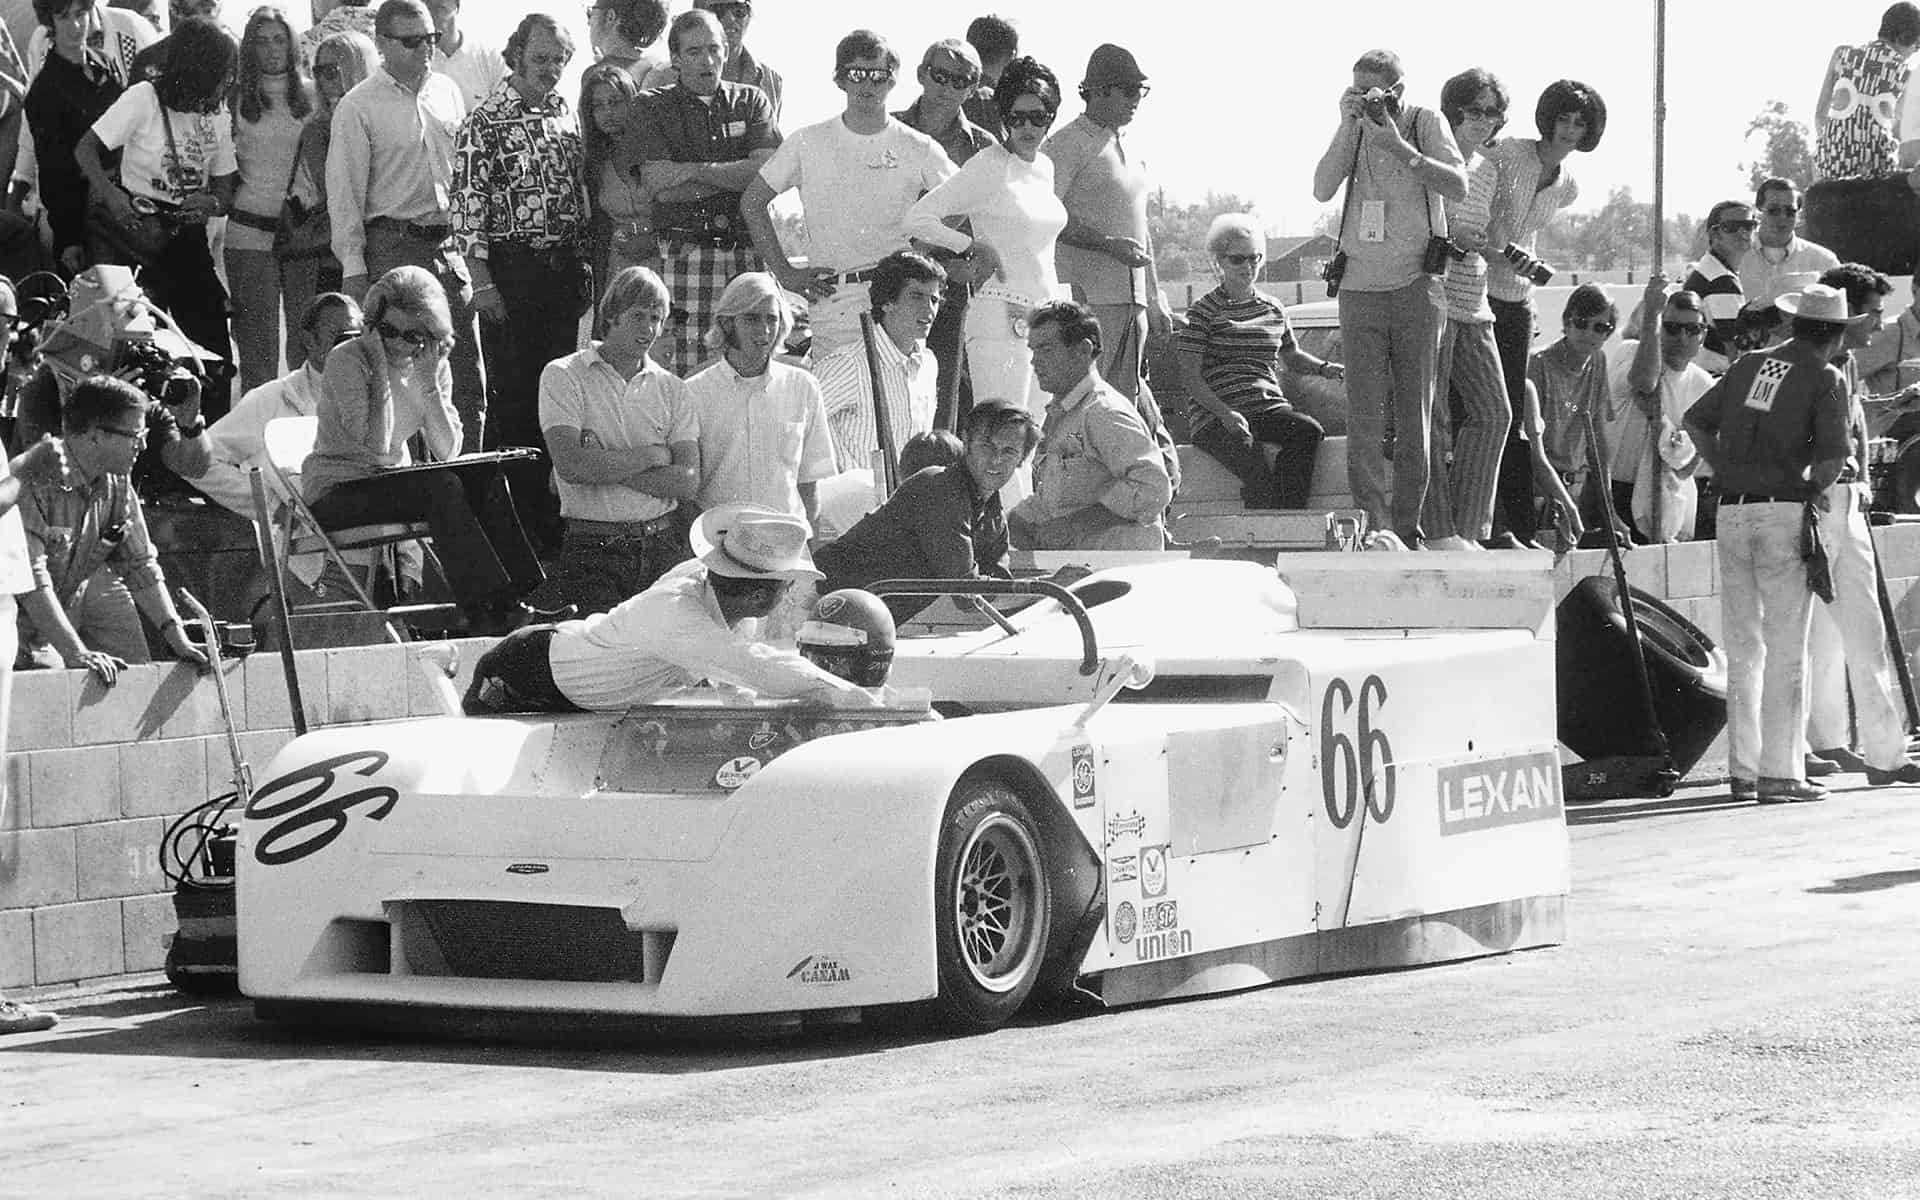 Thursday autos once again, with what was probably one of the craziest  racing cars with advanced tech for its time: the Chaparral 2J! This one  used vacuum to glue the car to